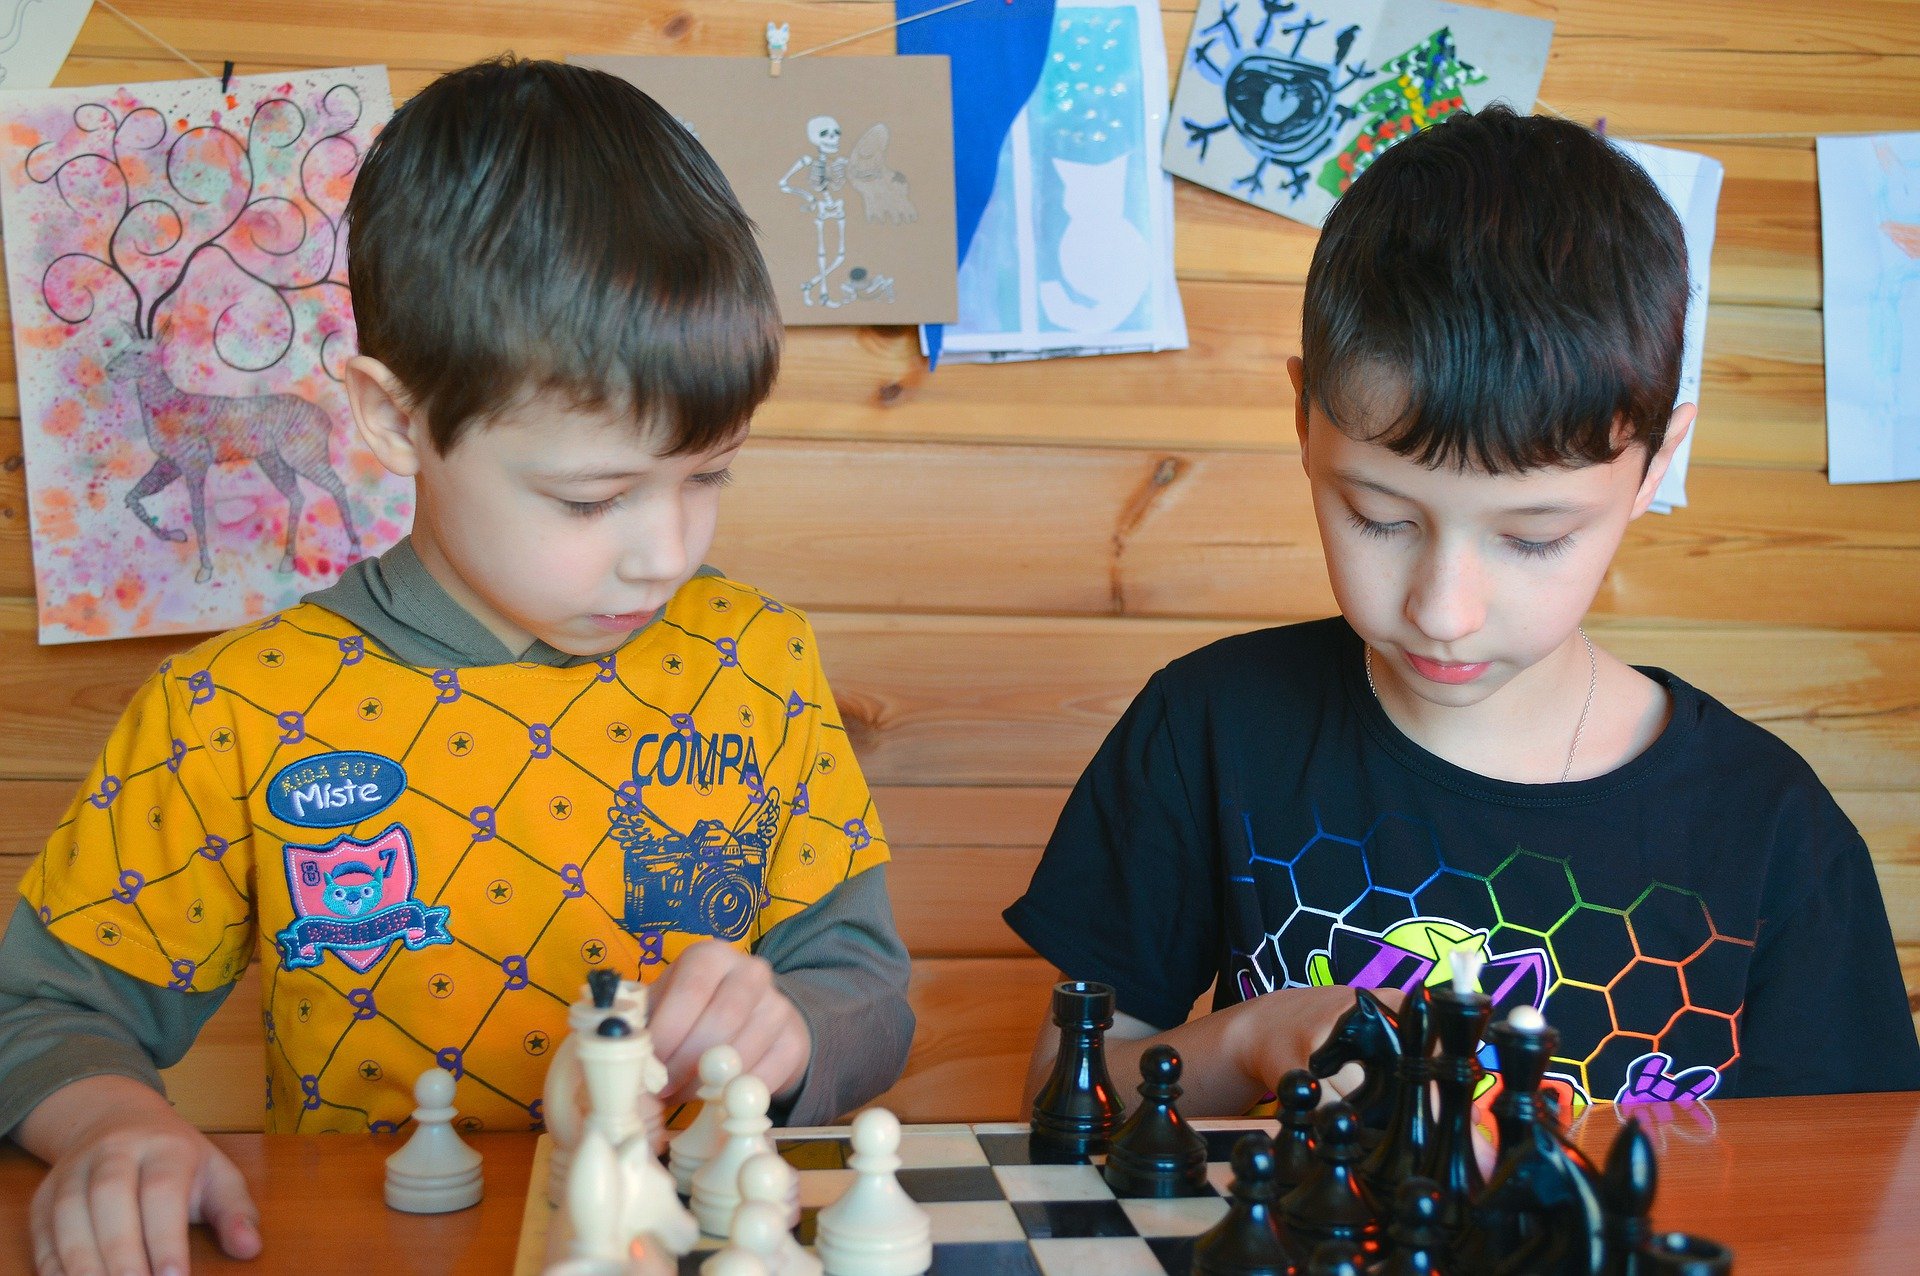 Pictured - Two young boys playing chess | Source: Pixabay